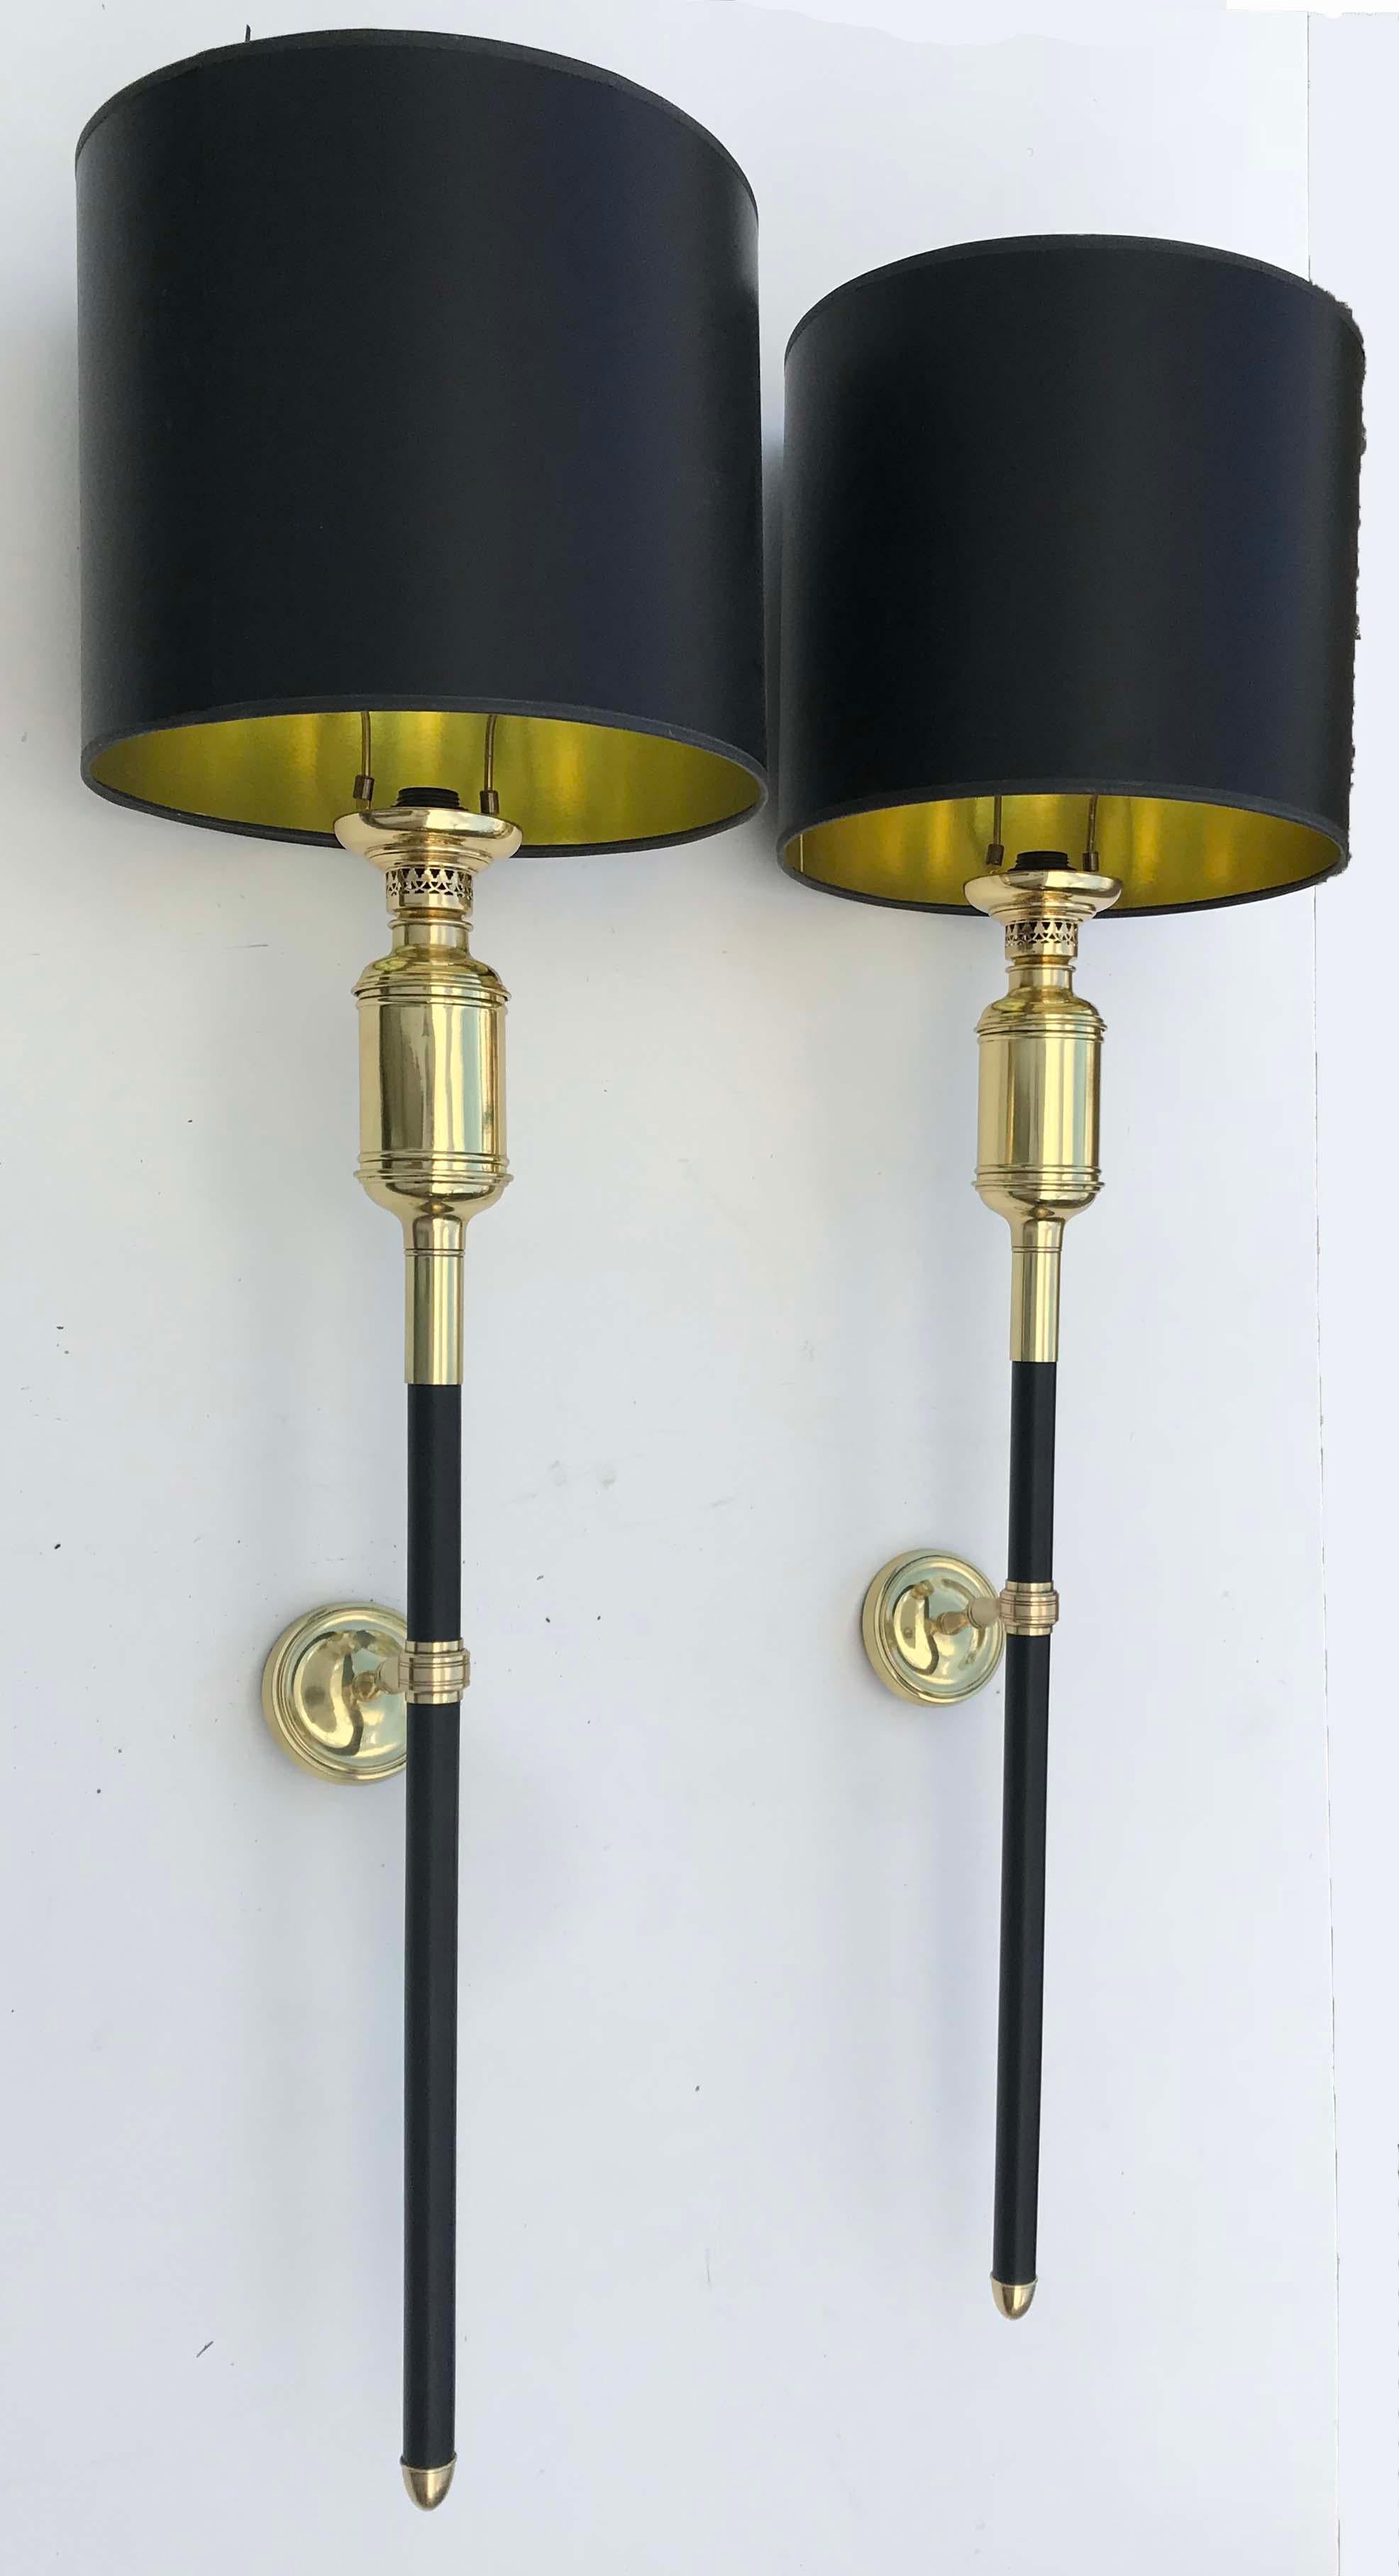 Incredible Maison Lancel sconces, very rare in that dimension 53 inches High.
US rewired and in working condition
Totally restored and refinished
100w max Bulb
Shade dimensions 14 diameter, 10 high
Back plate: 5